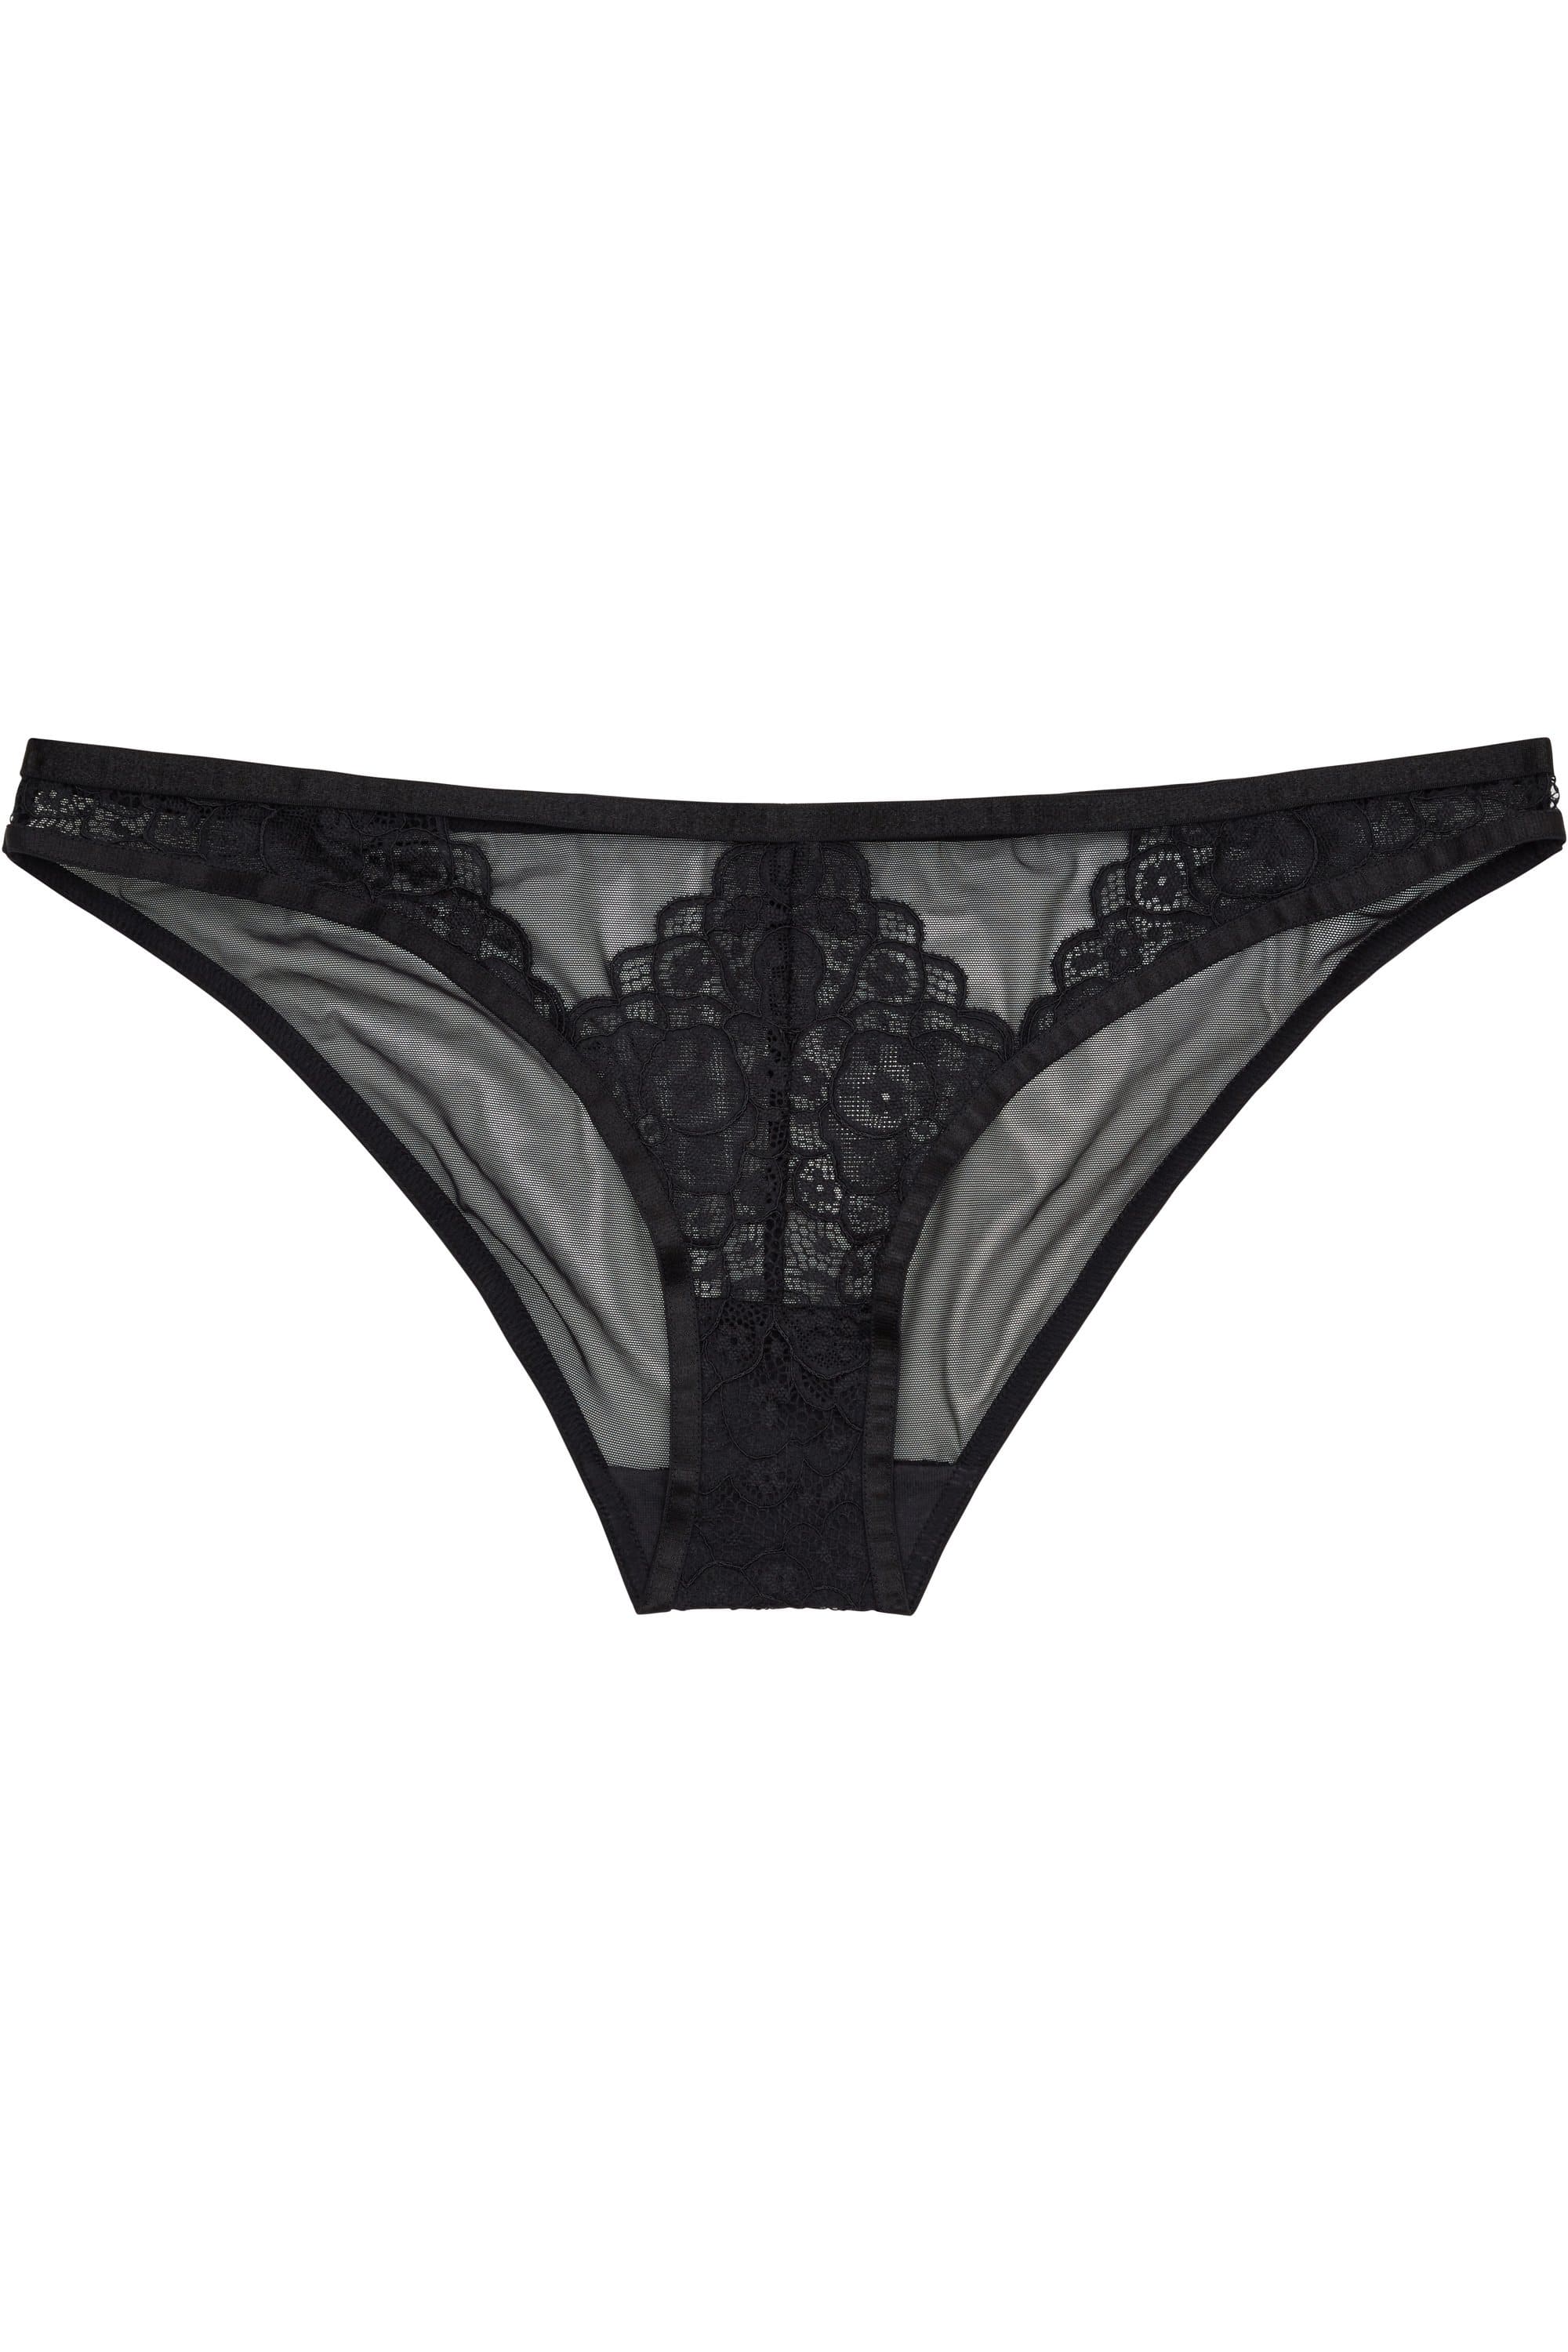 Willa lace cut out briefs